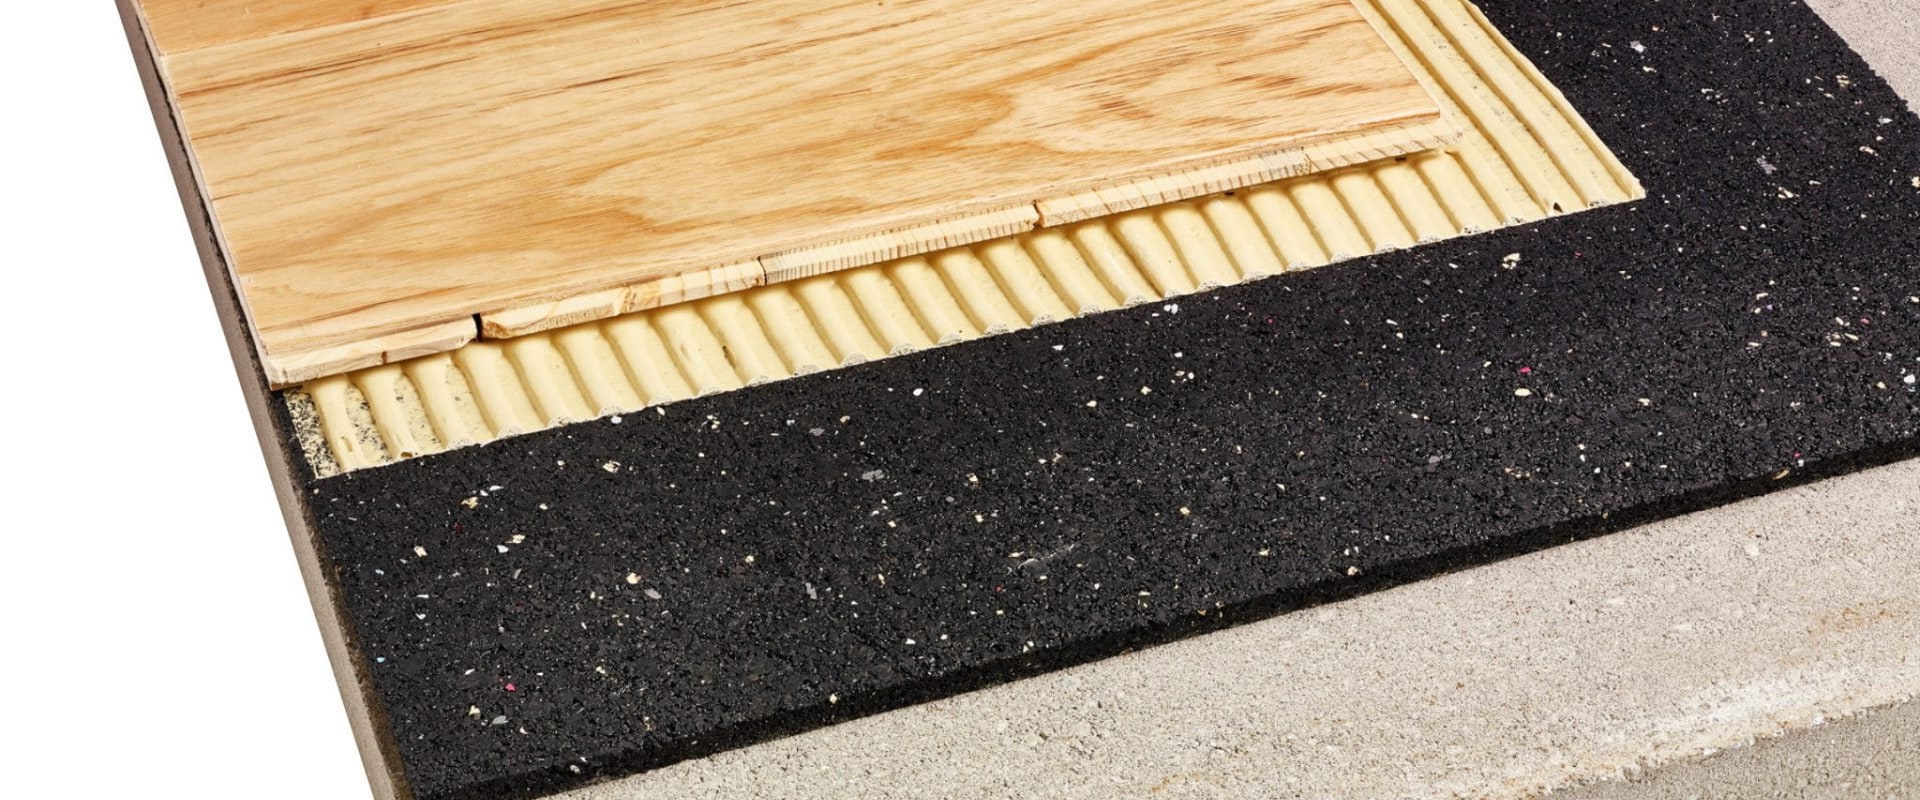 What is the Best Type of Flooring to Use with Acoustic Underlay?